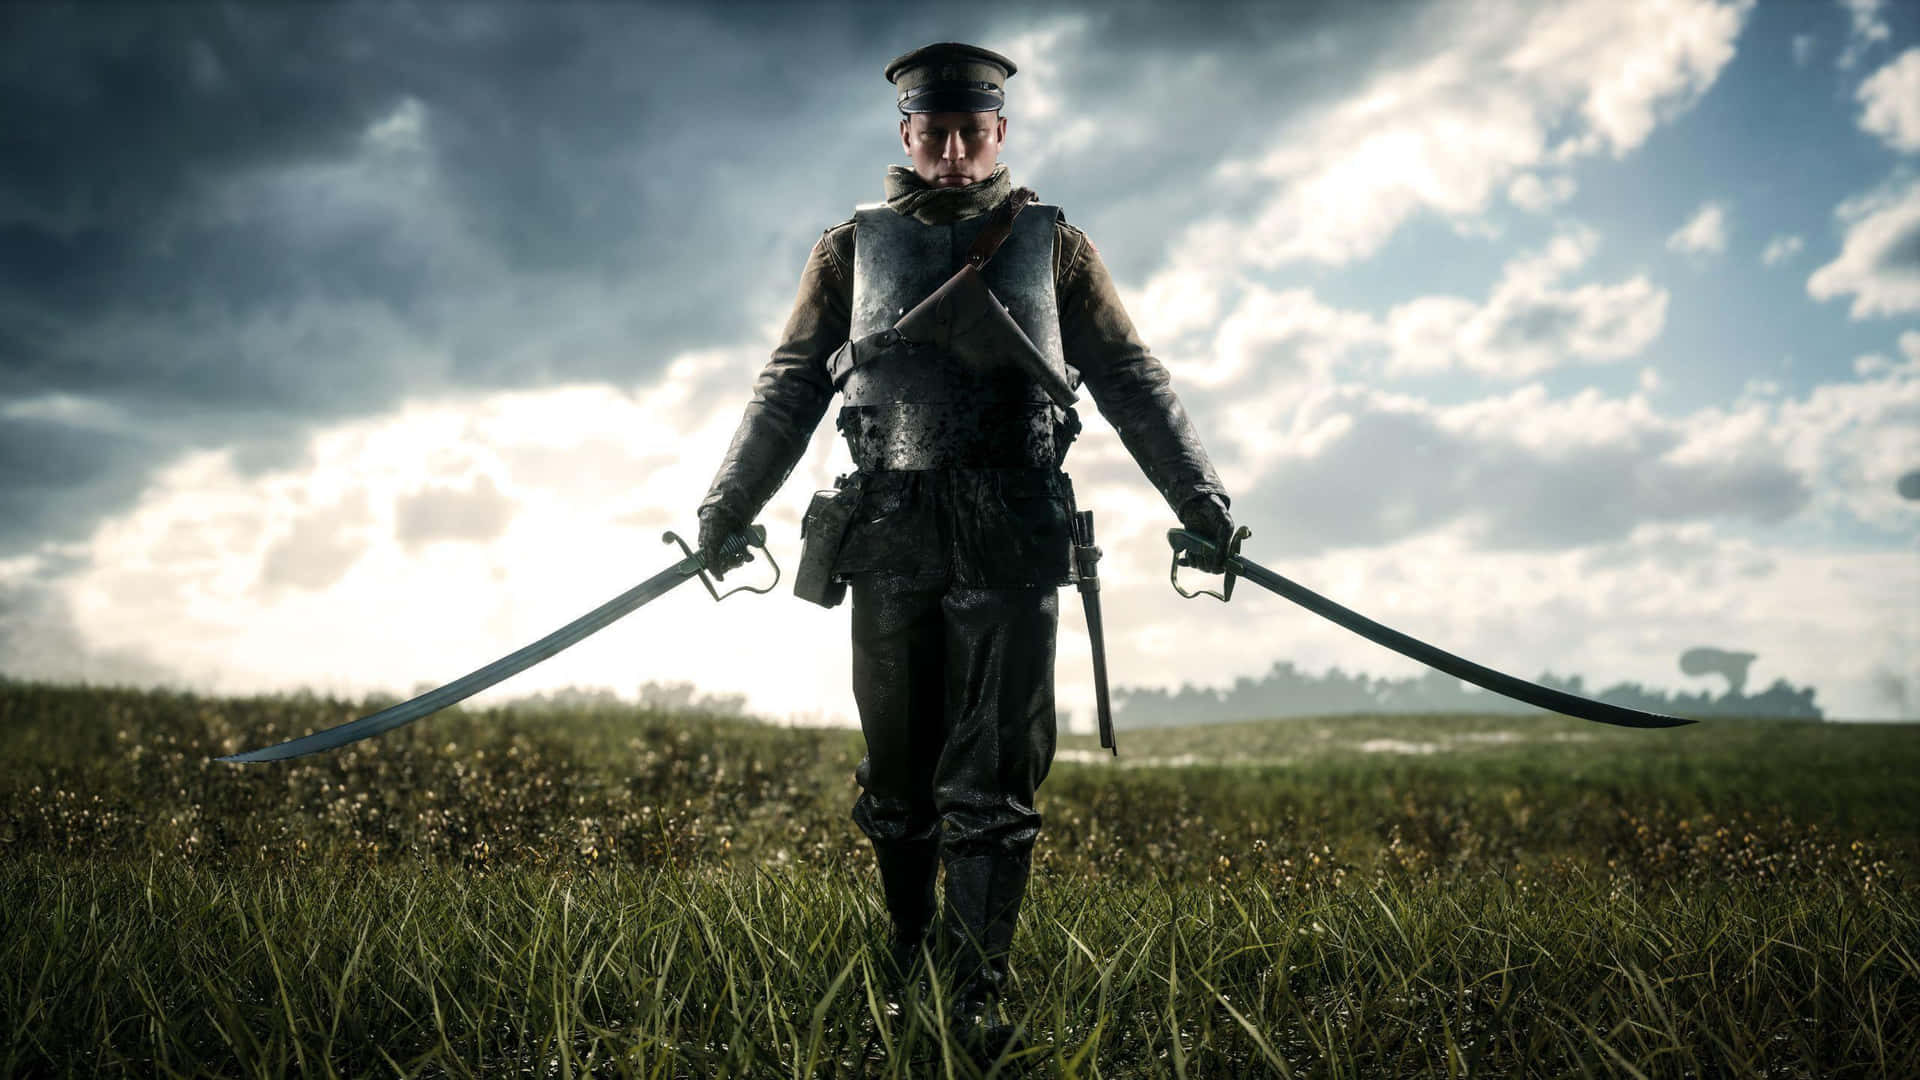 A Soldier In Uniform Standing In A Field With Two Swords